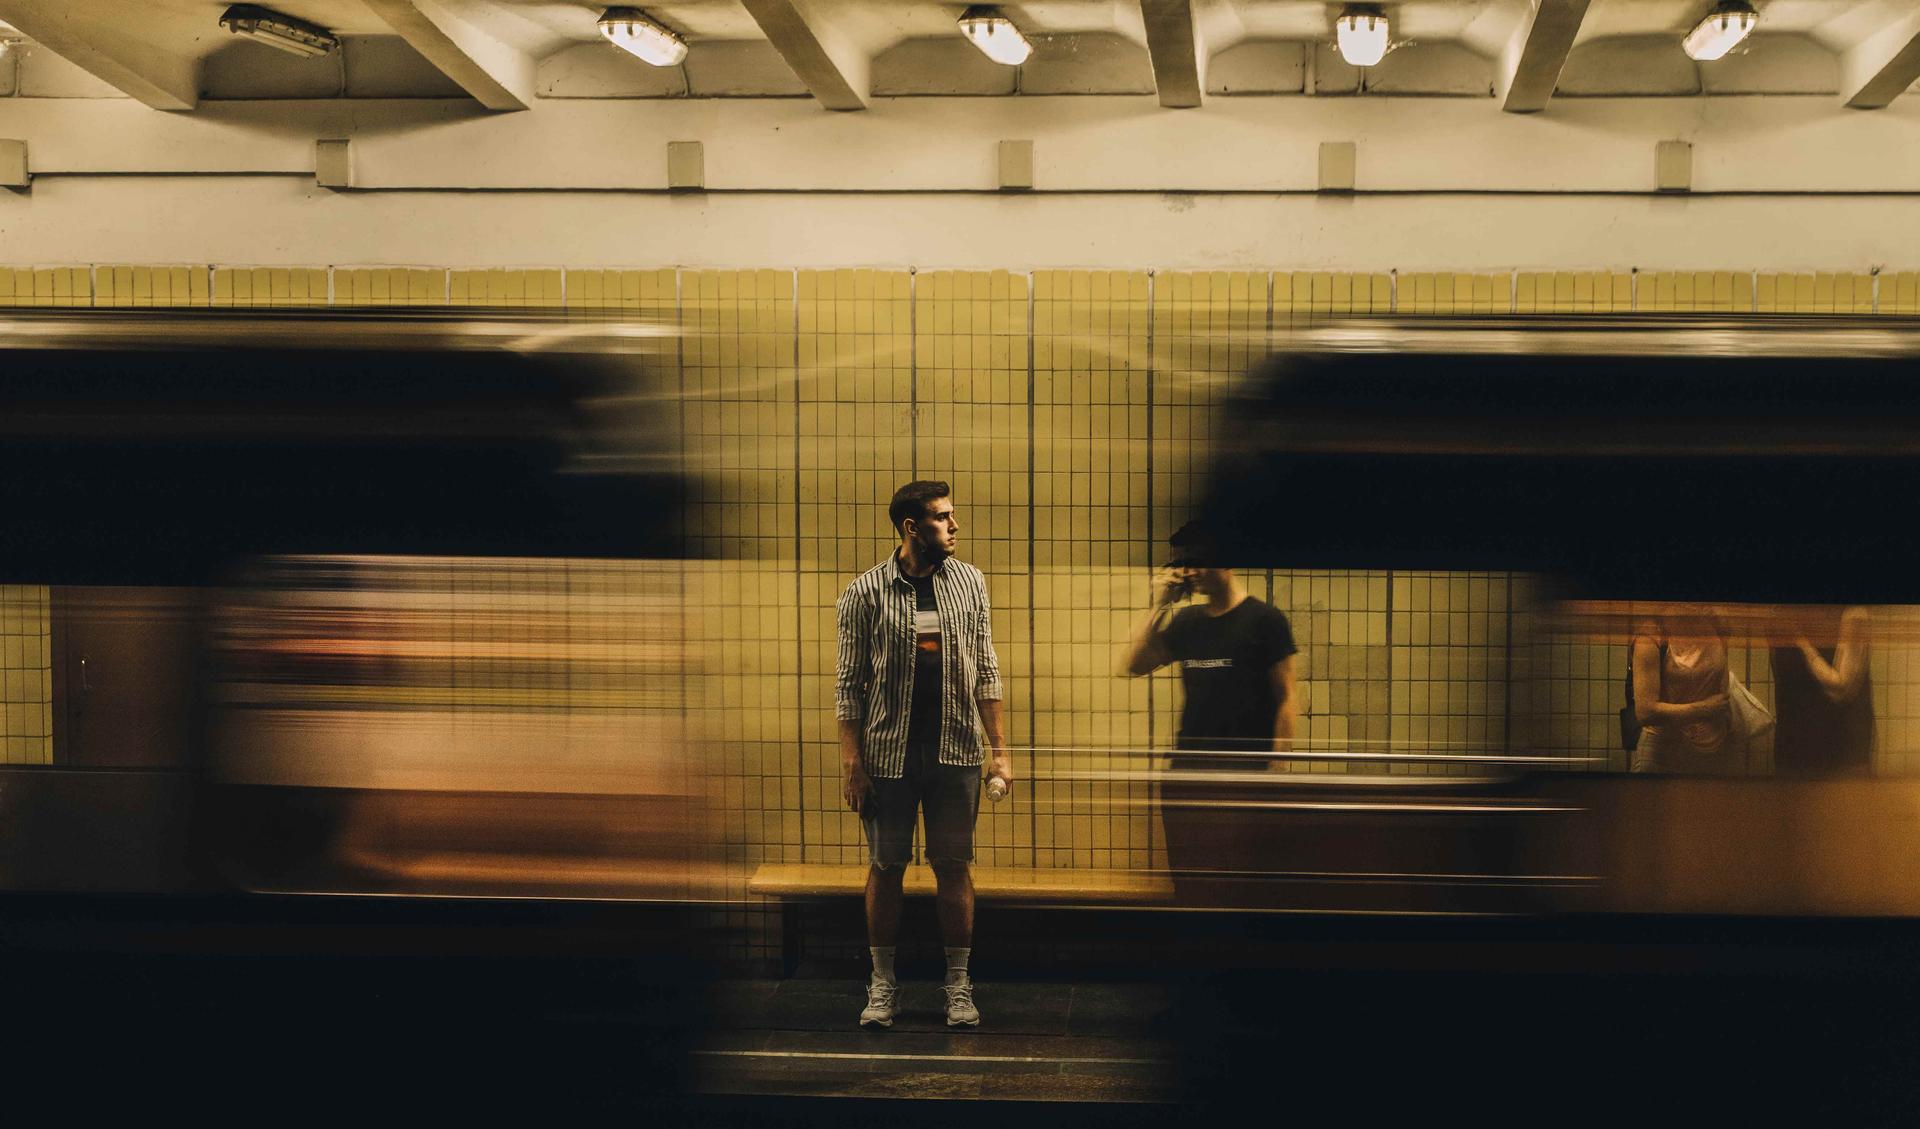 A person is standing on a underground platform and a train is passing by.